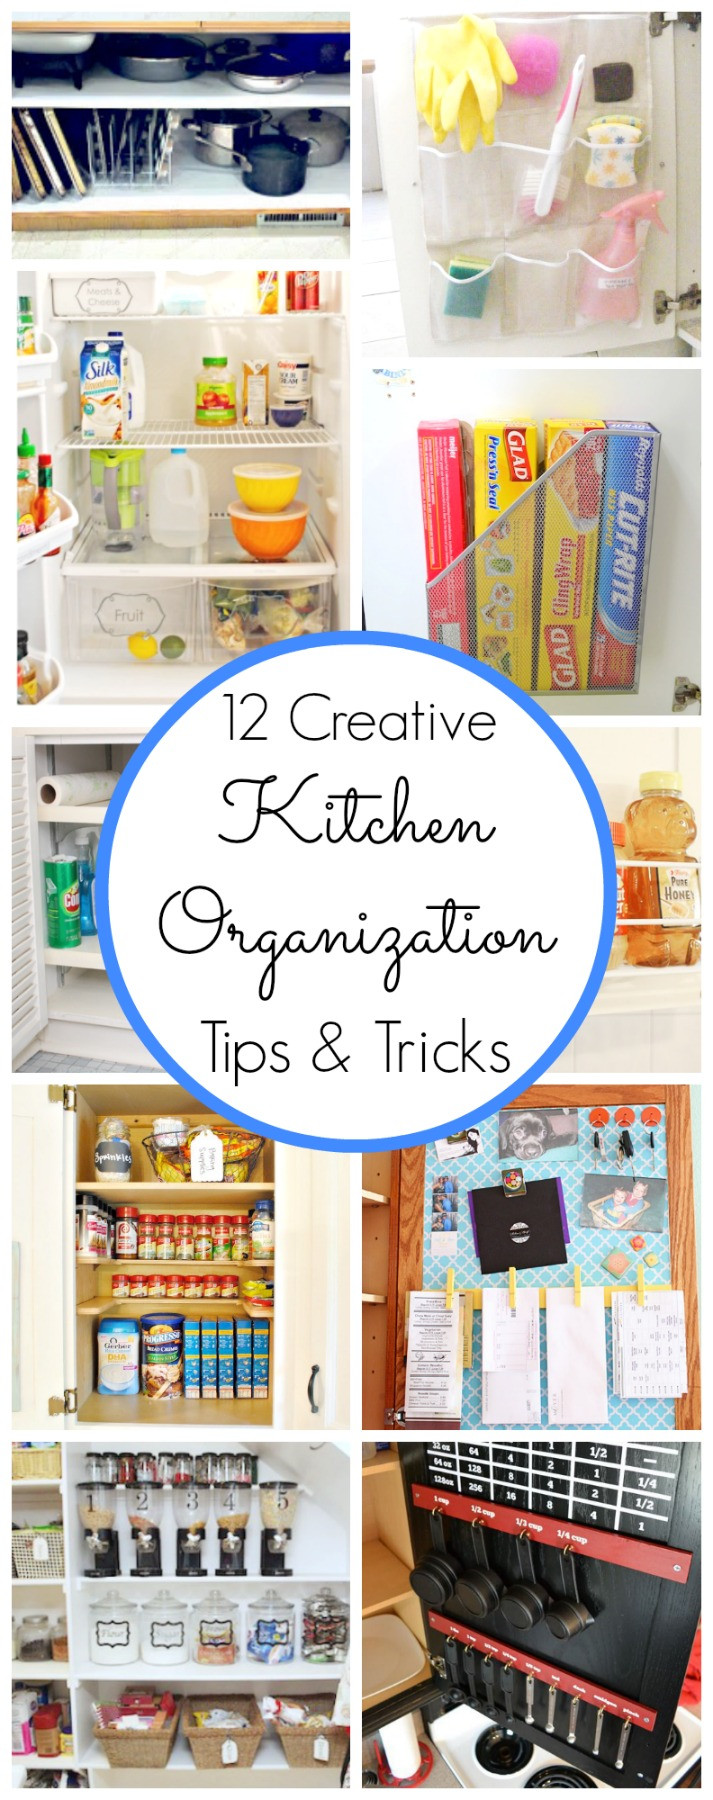 Kitchen Organization Tips
 Kitchen Organization Tips and Tricks